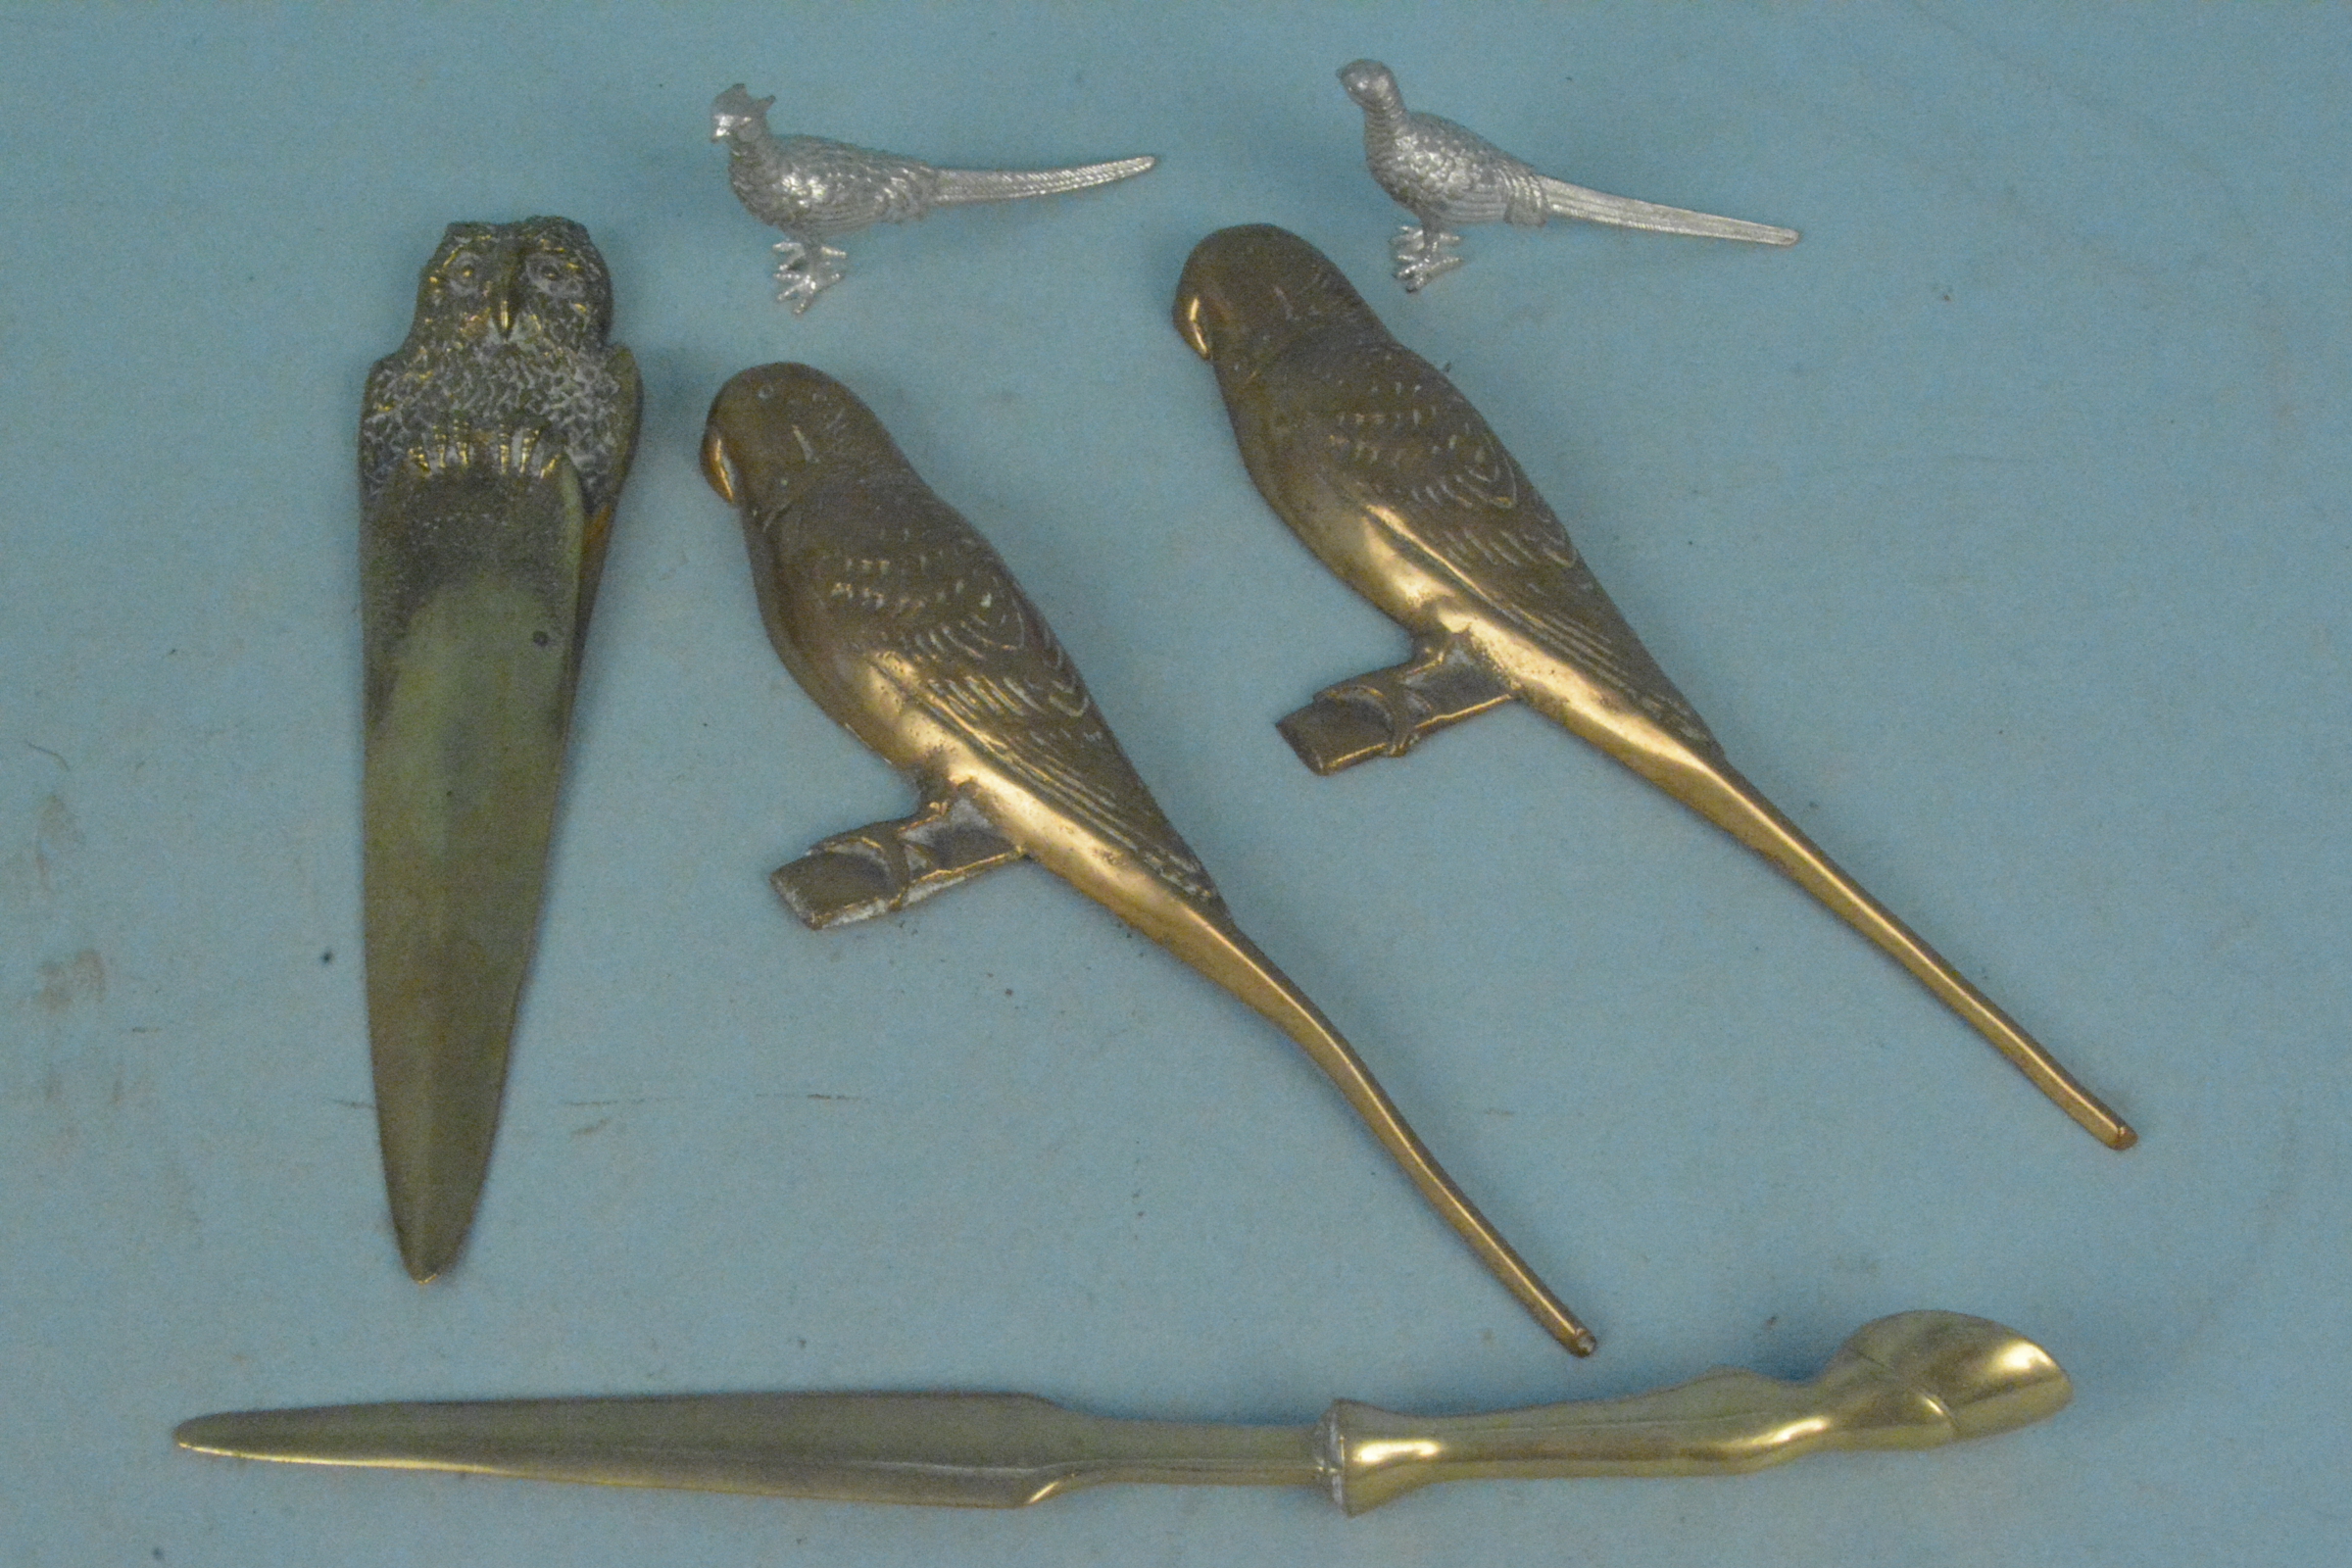 Mainly metalware with animal connections including a brass horse, - Image 3 of 3